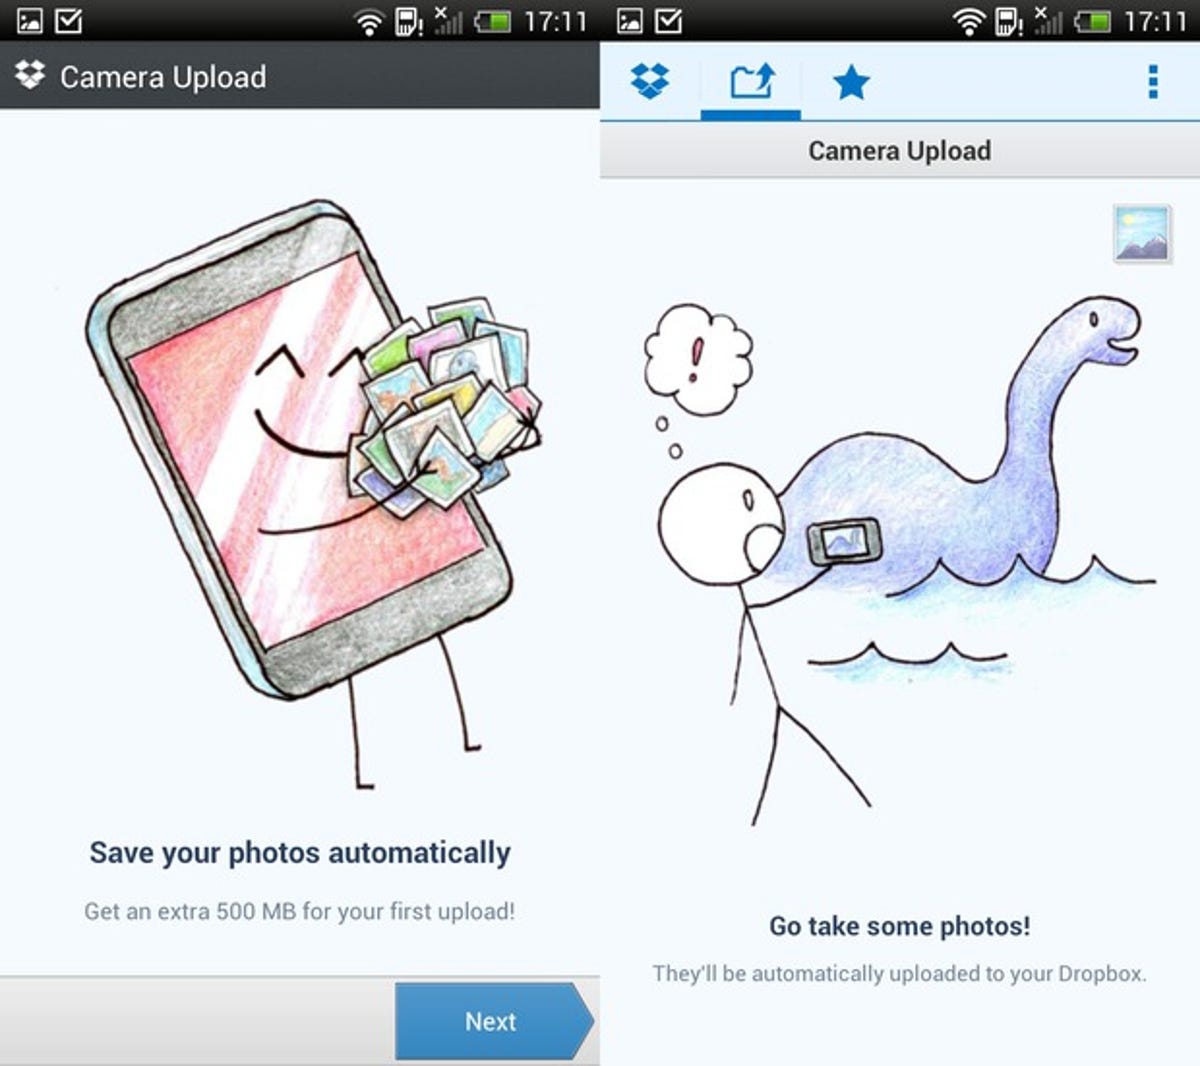 Activate Dropbox and photo uploading